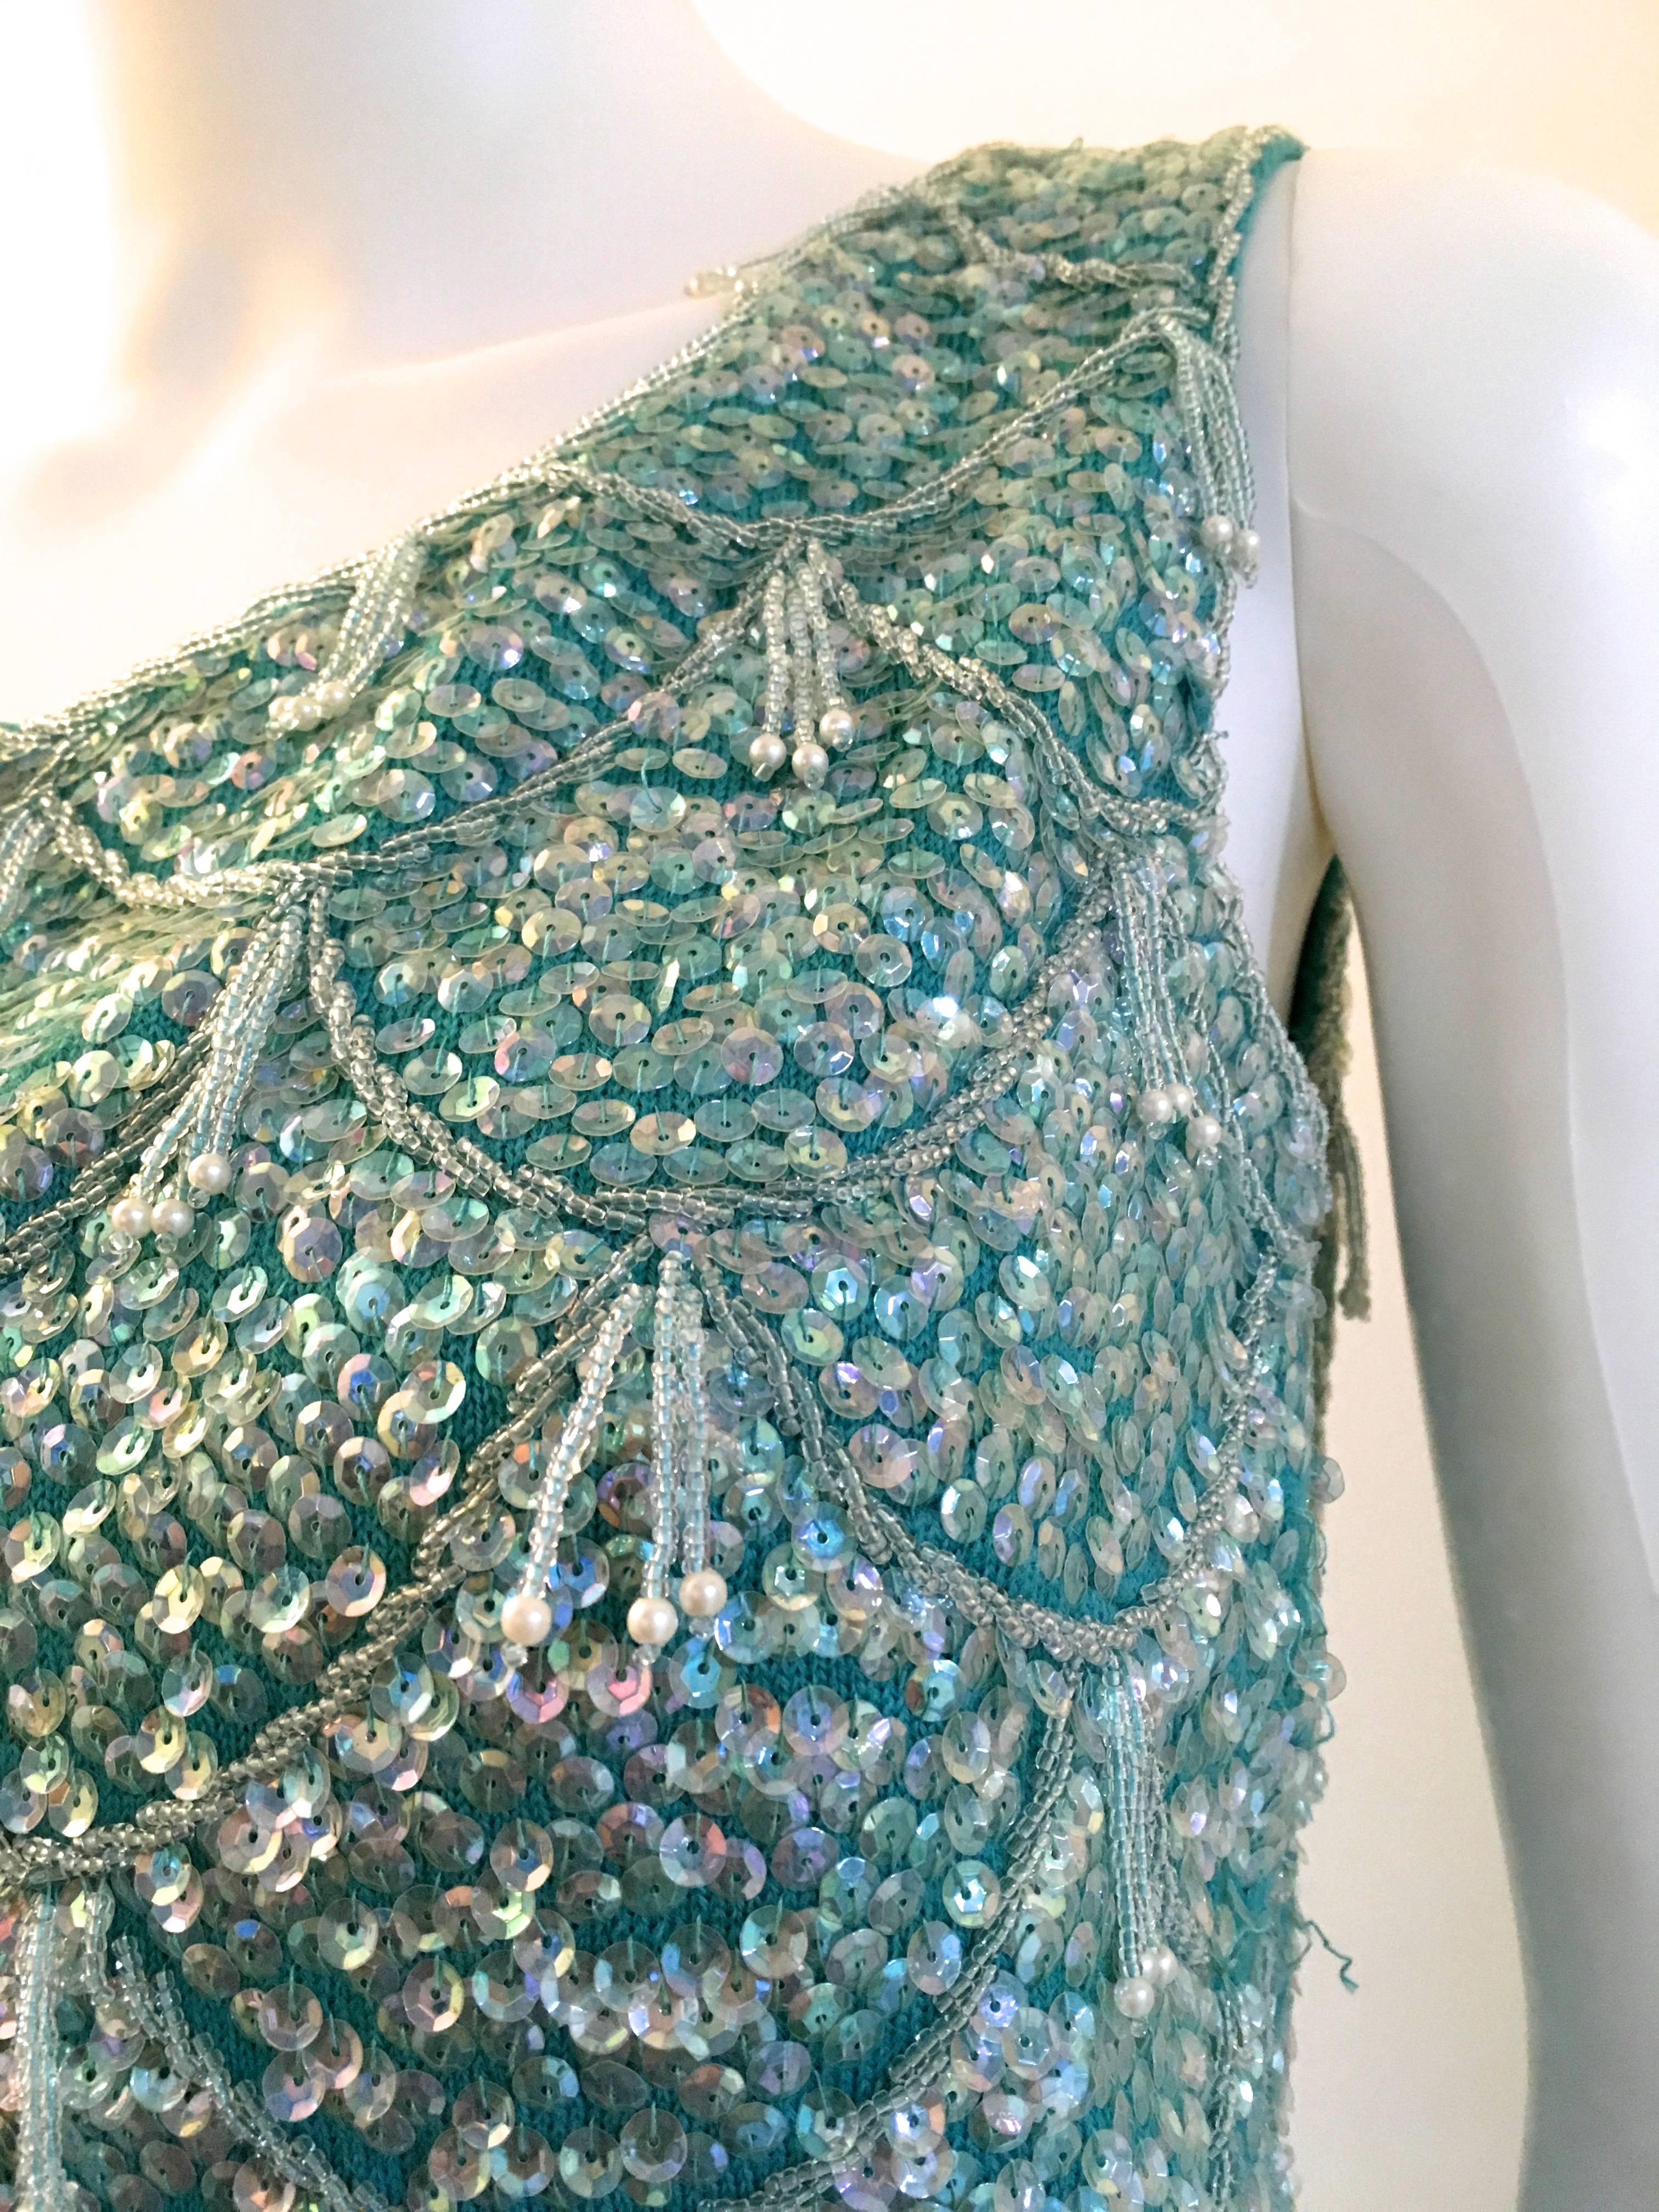 Presented here is a gorgeous sleeveless top from the 1970's. This beautiful top is a composition of sequins and rhinestones faceted across the entire garment. The top zips down the back and is composed of colors of aquamarine, blue, silver and